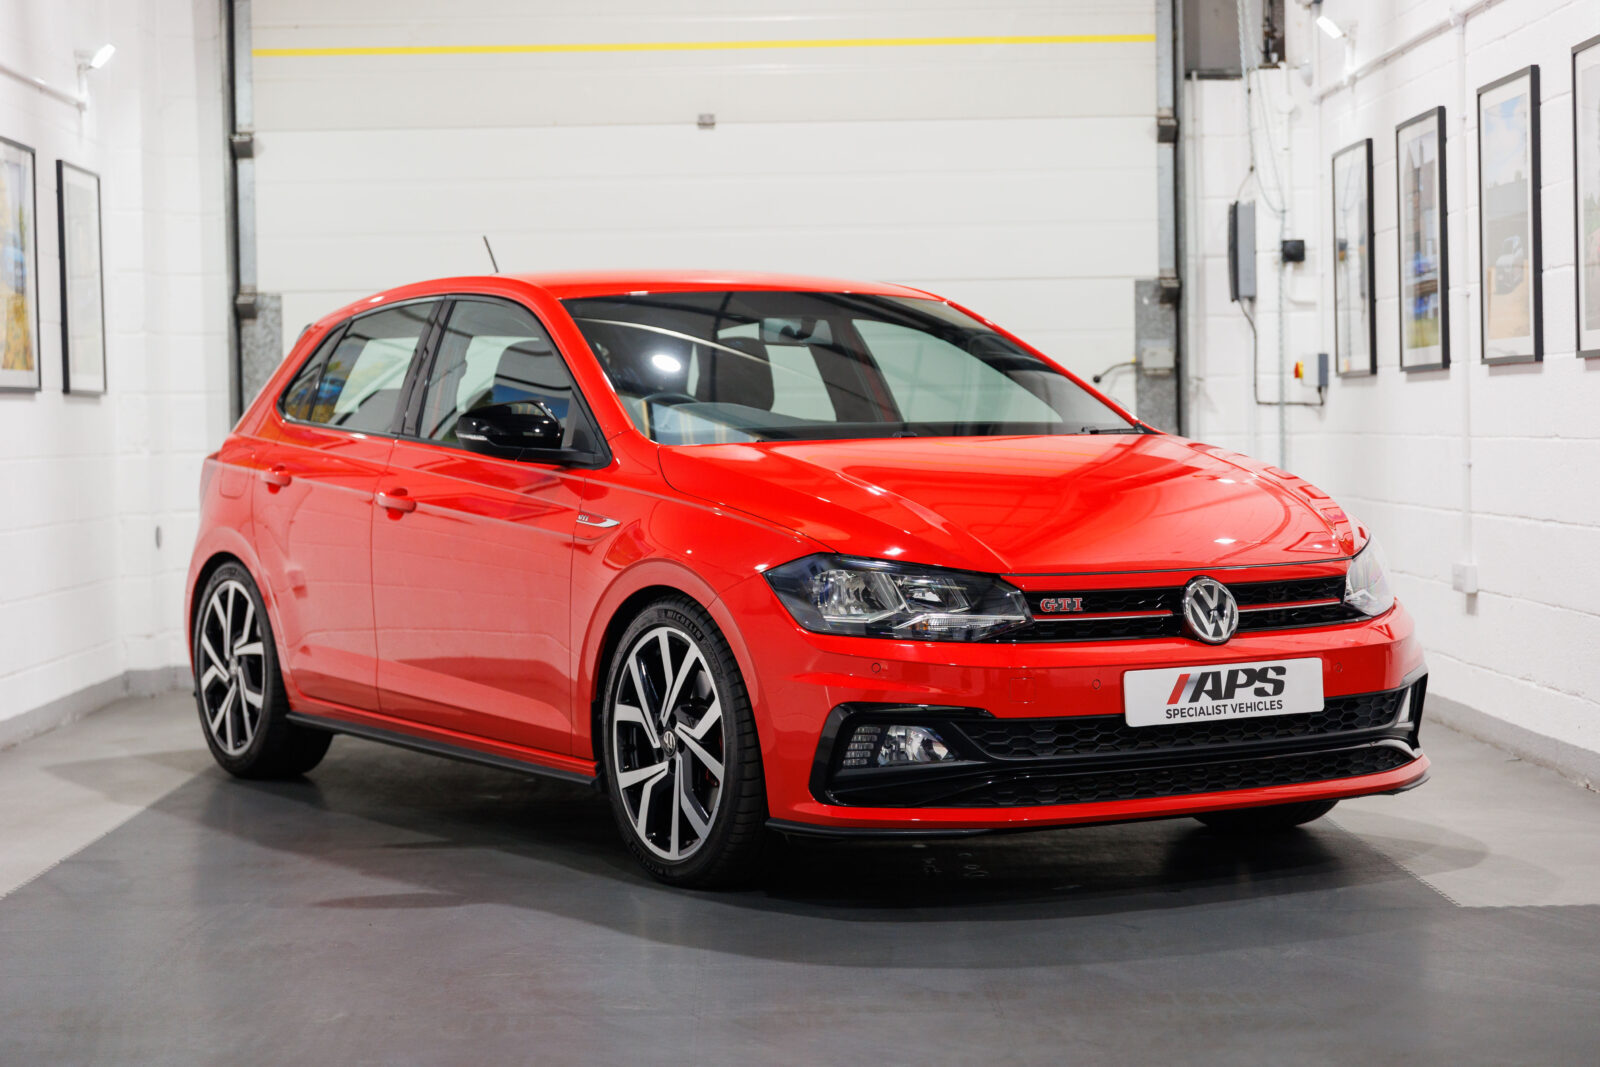 2020 VW Polo GTI  APS Specialist Vehicles